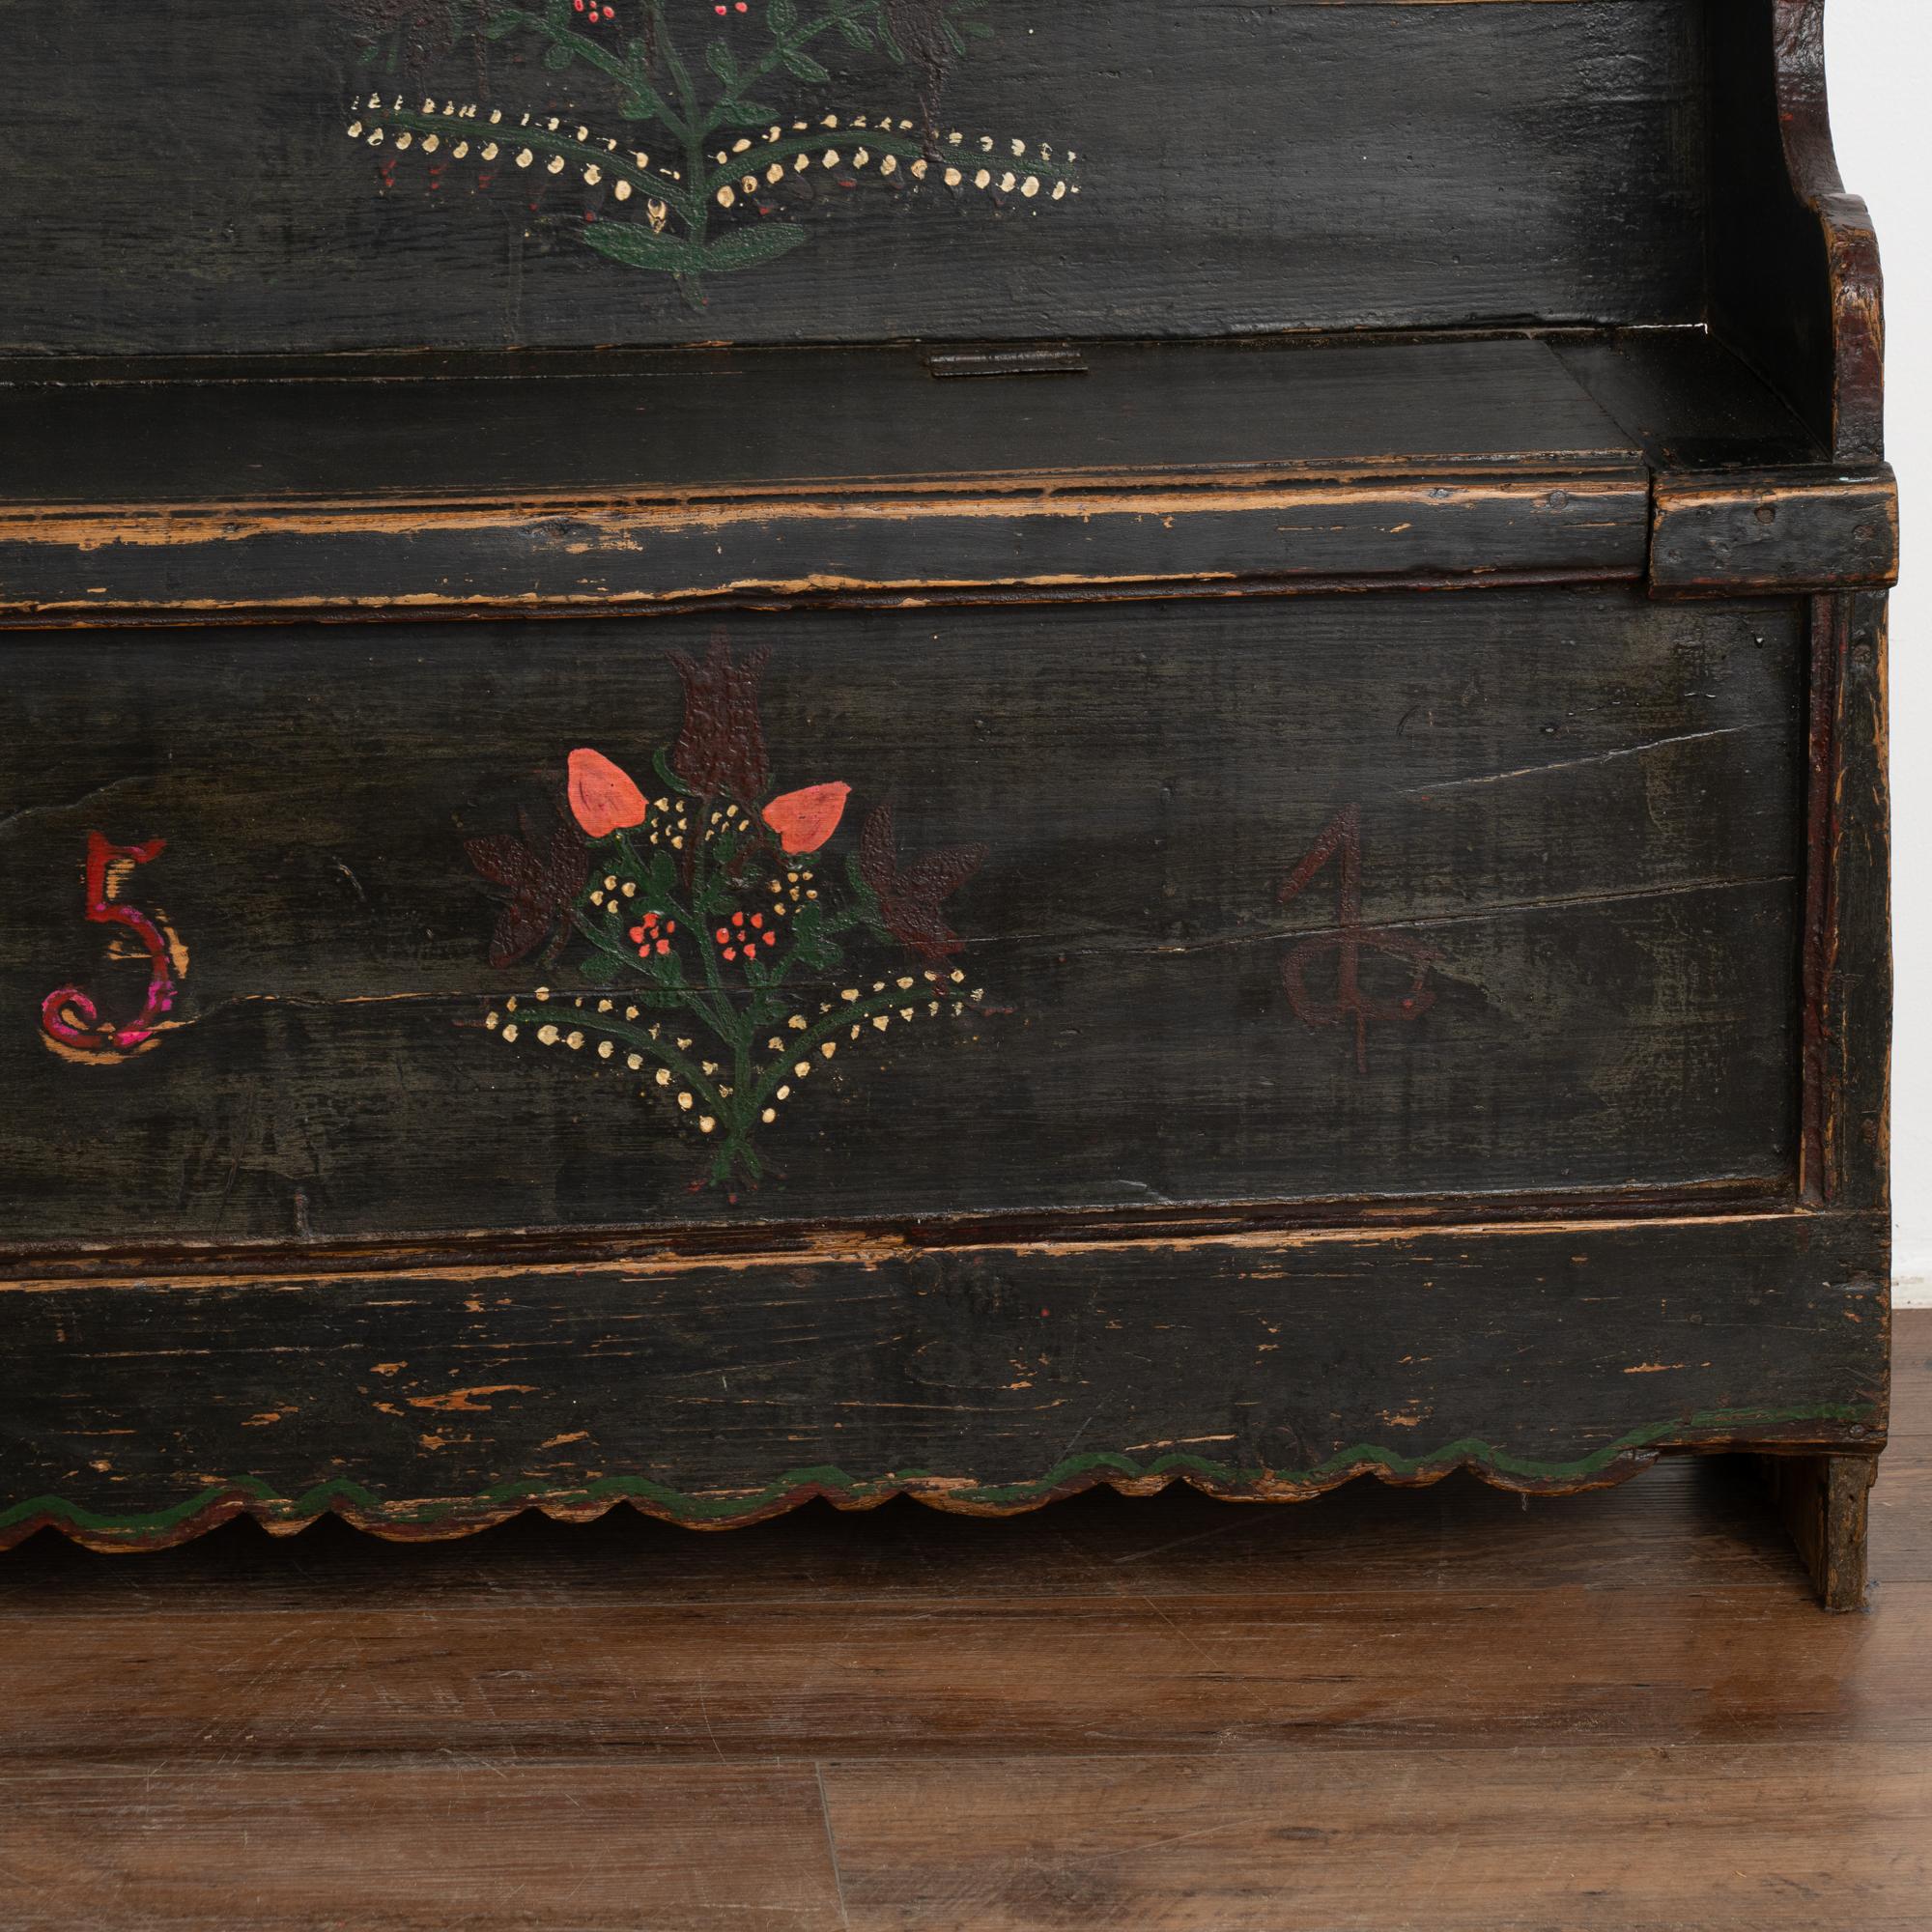 Original Black Painted Narrow Pine Bench With Storage, Hungary dated 1951 For Sale 3